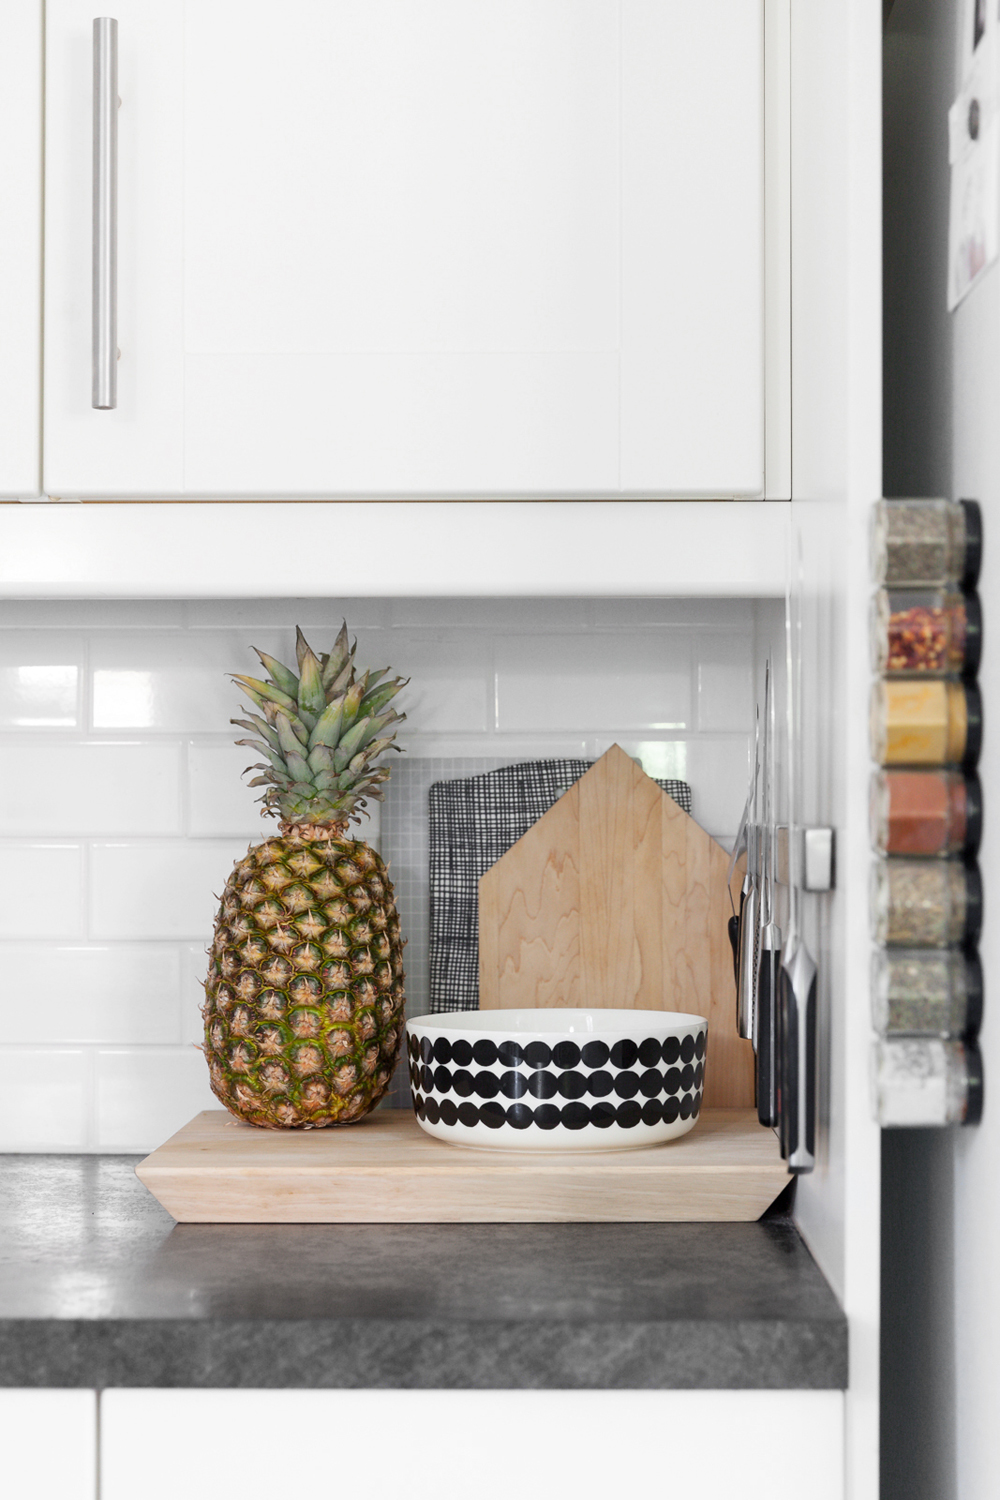 A patterned bowl and fresh pineapple on the kitchen counter